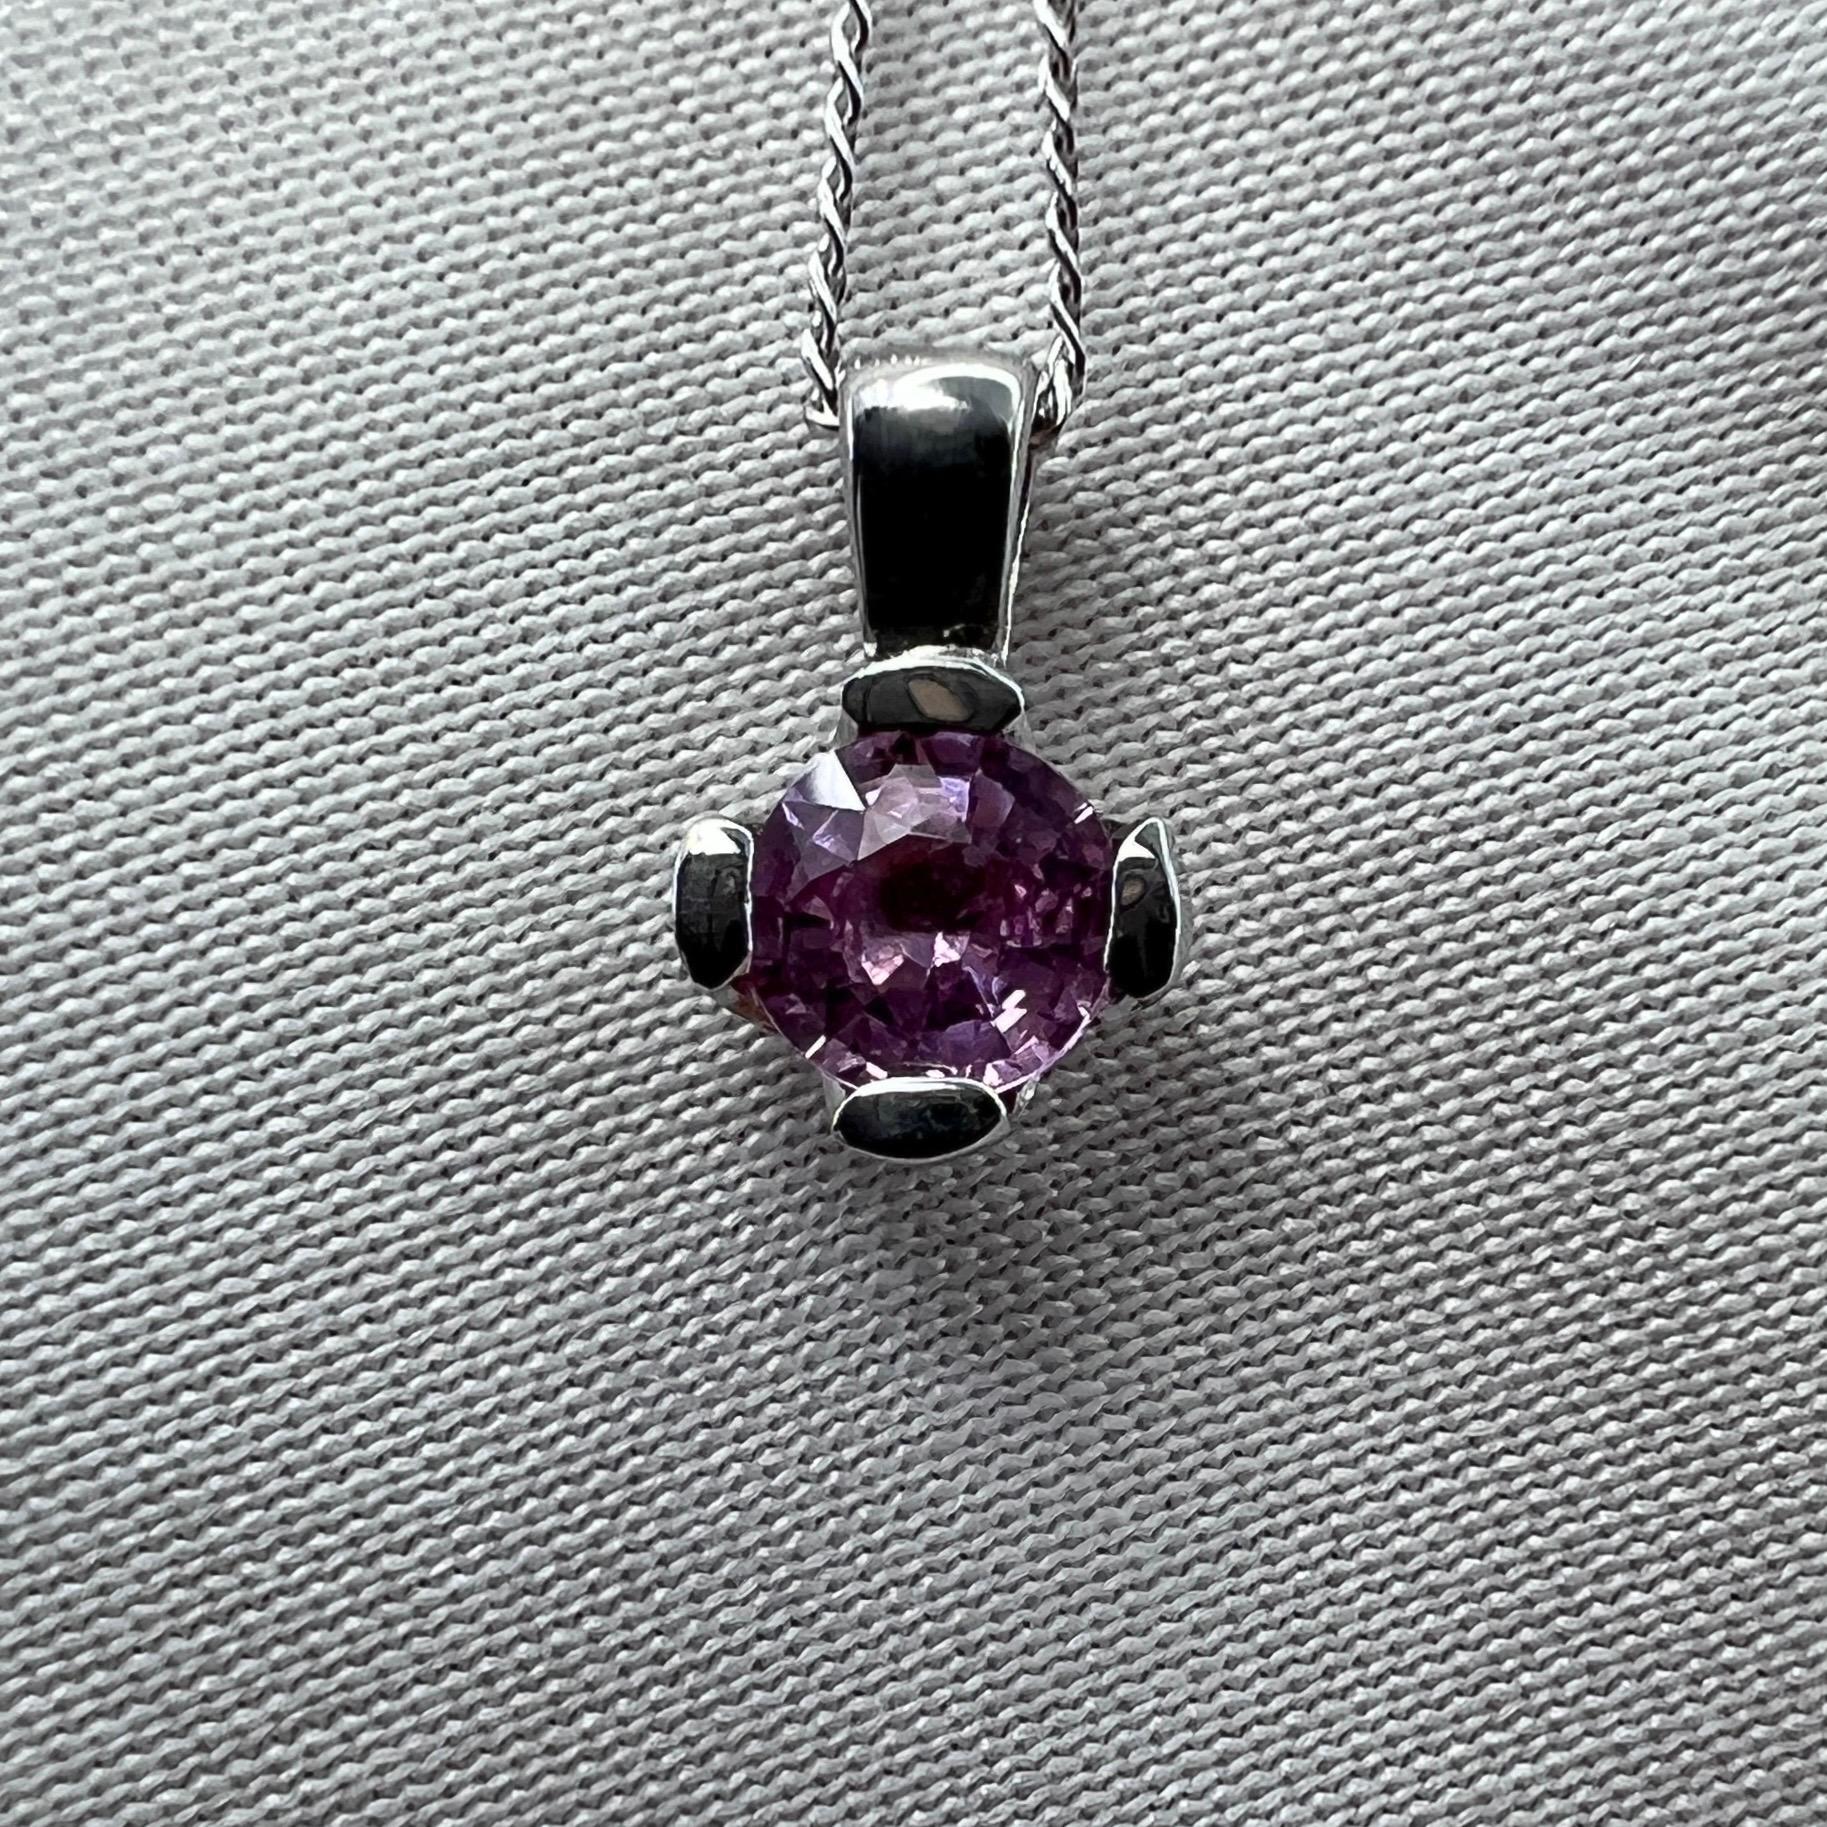 Fine Pink Ceylon Sapphire Round Cut 18k White Gold Solitaire Pendant.

0.35 Carat sapphire with a beautiful fine pink colour and excellent clarity, very clean stone. Also has an excellent round brilliant cut showing lots of light return and